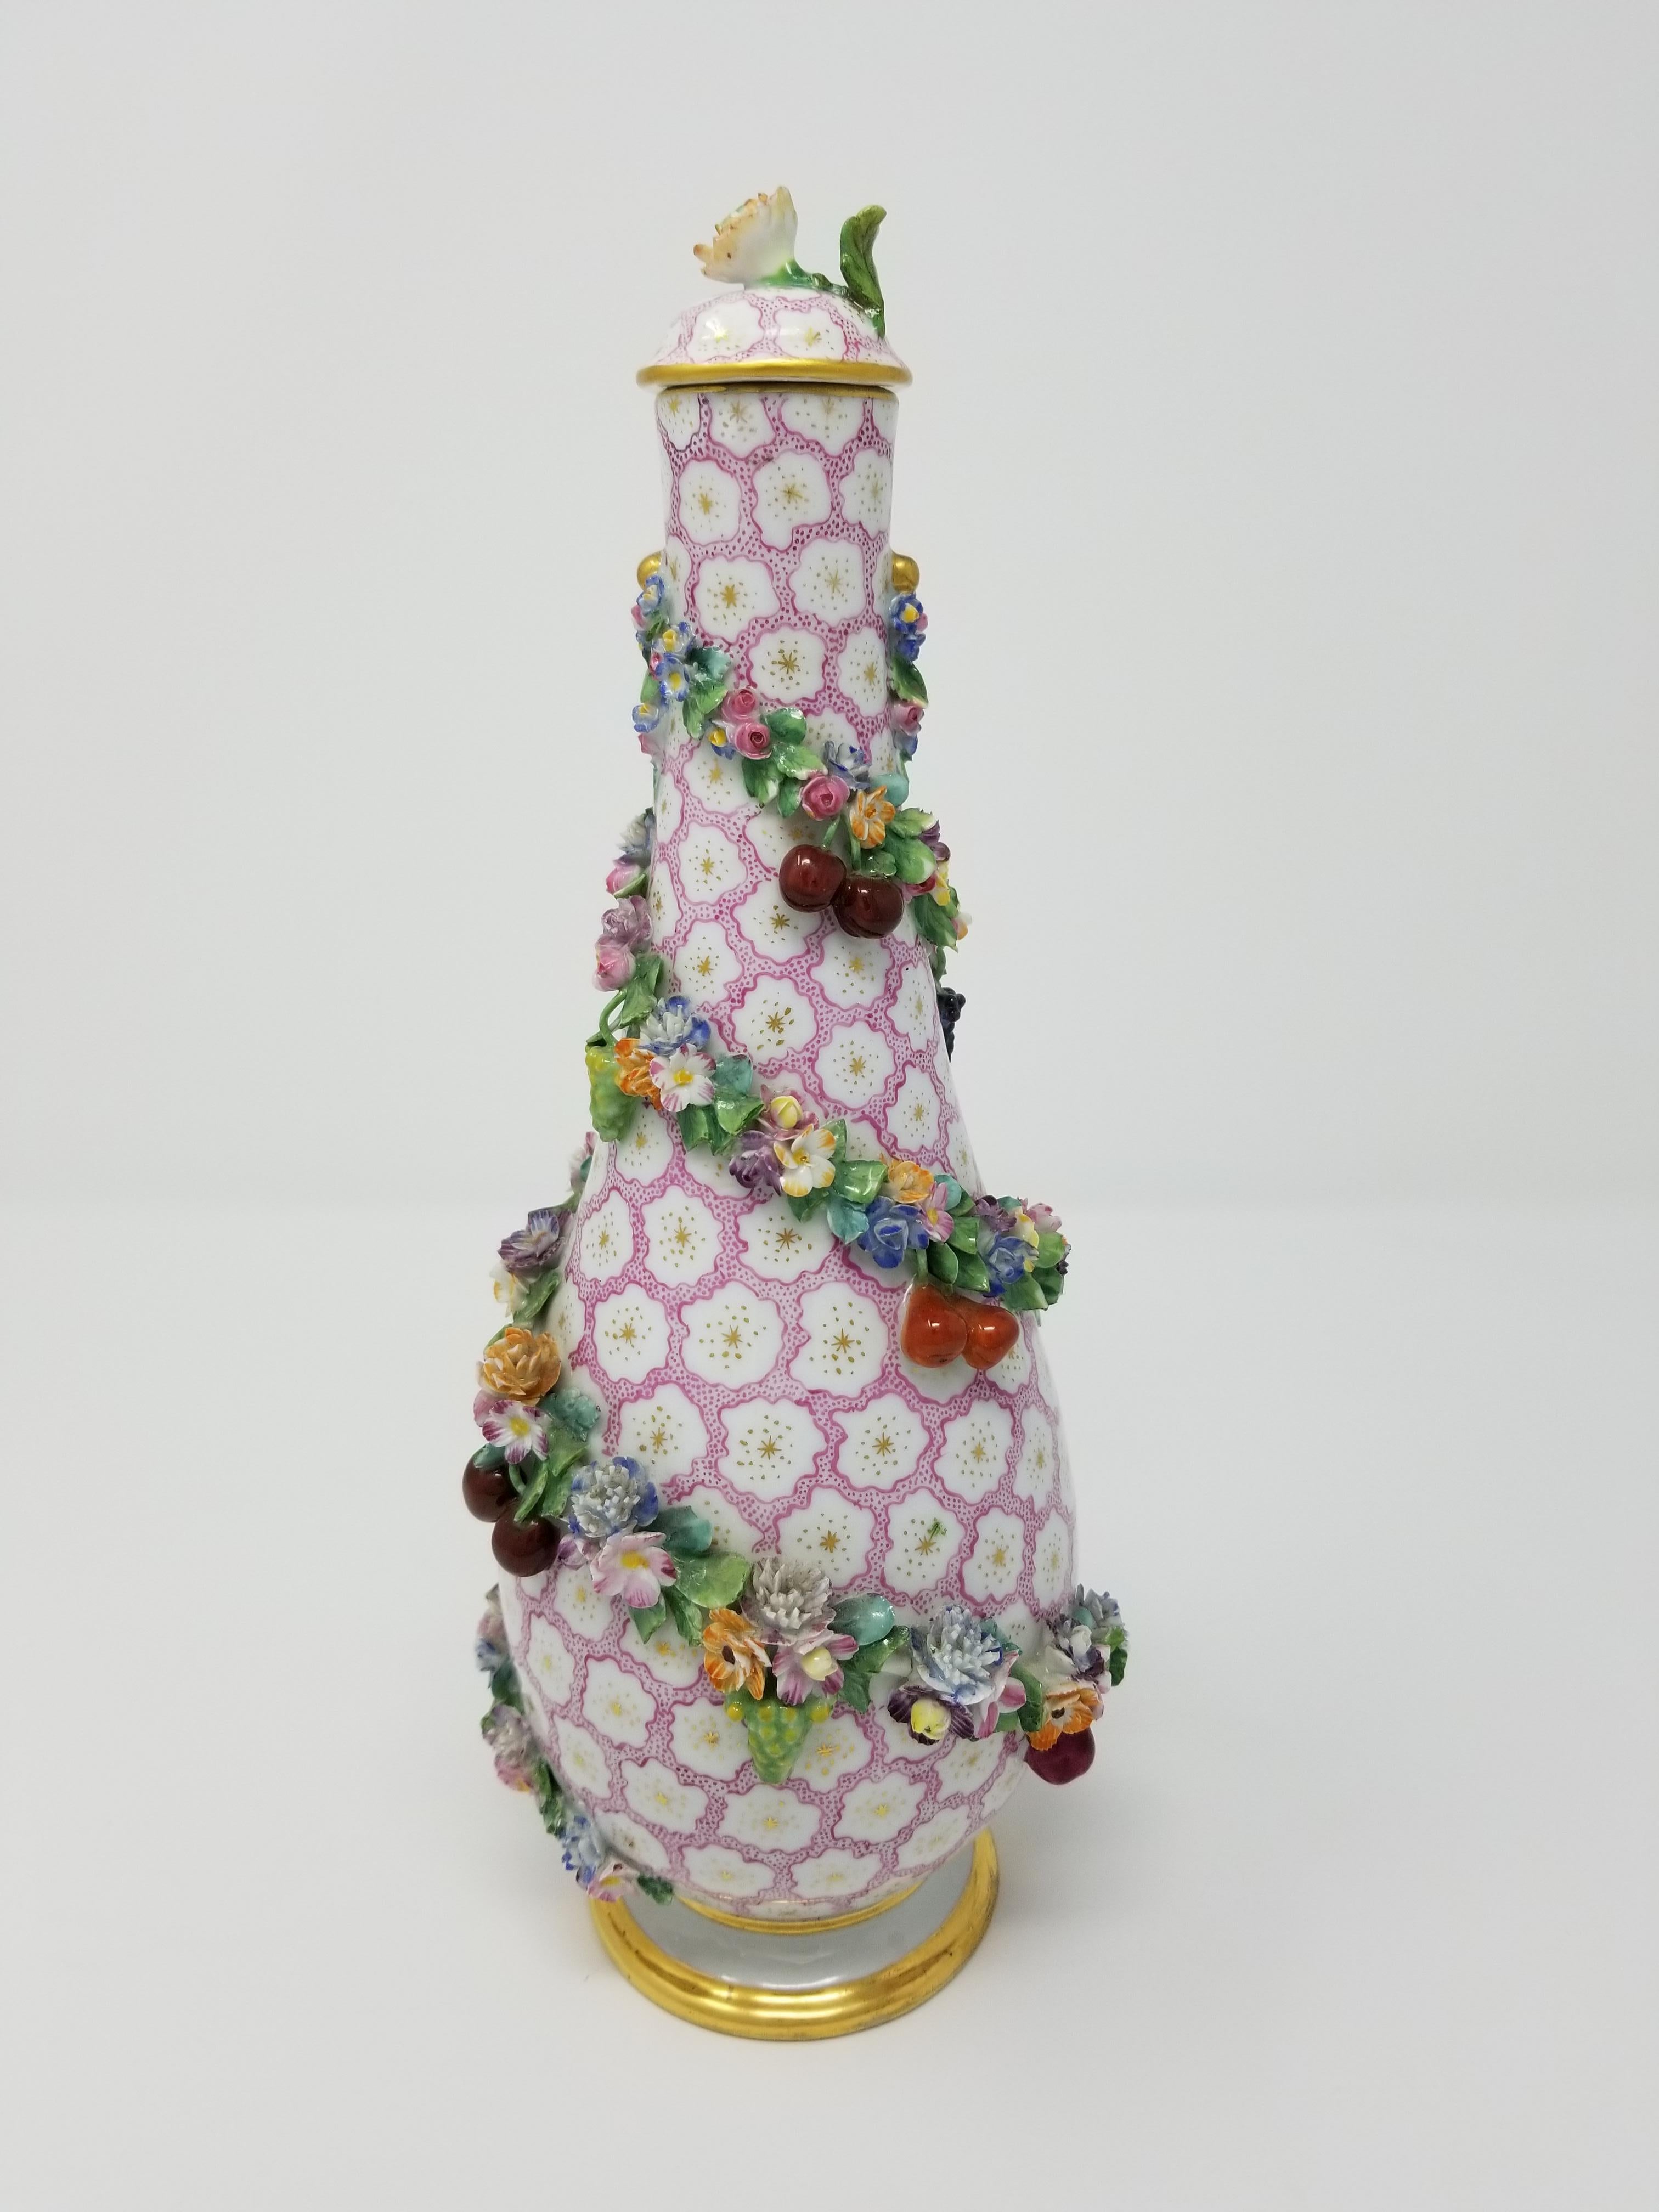 A beautiful early 19th century pear shaped Meissen covered vase with raised fruits, vines and flowers. The vase is finely hand painted with pink and white flowers. The rim and base of the vase are highlighted with 24-karat brushed gold and the pink